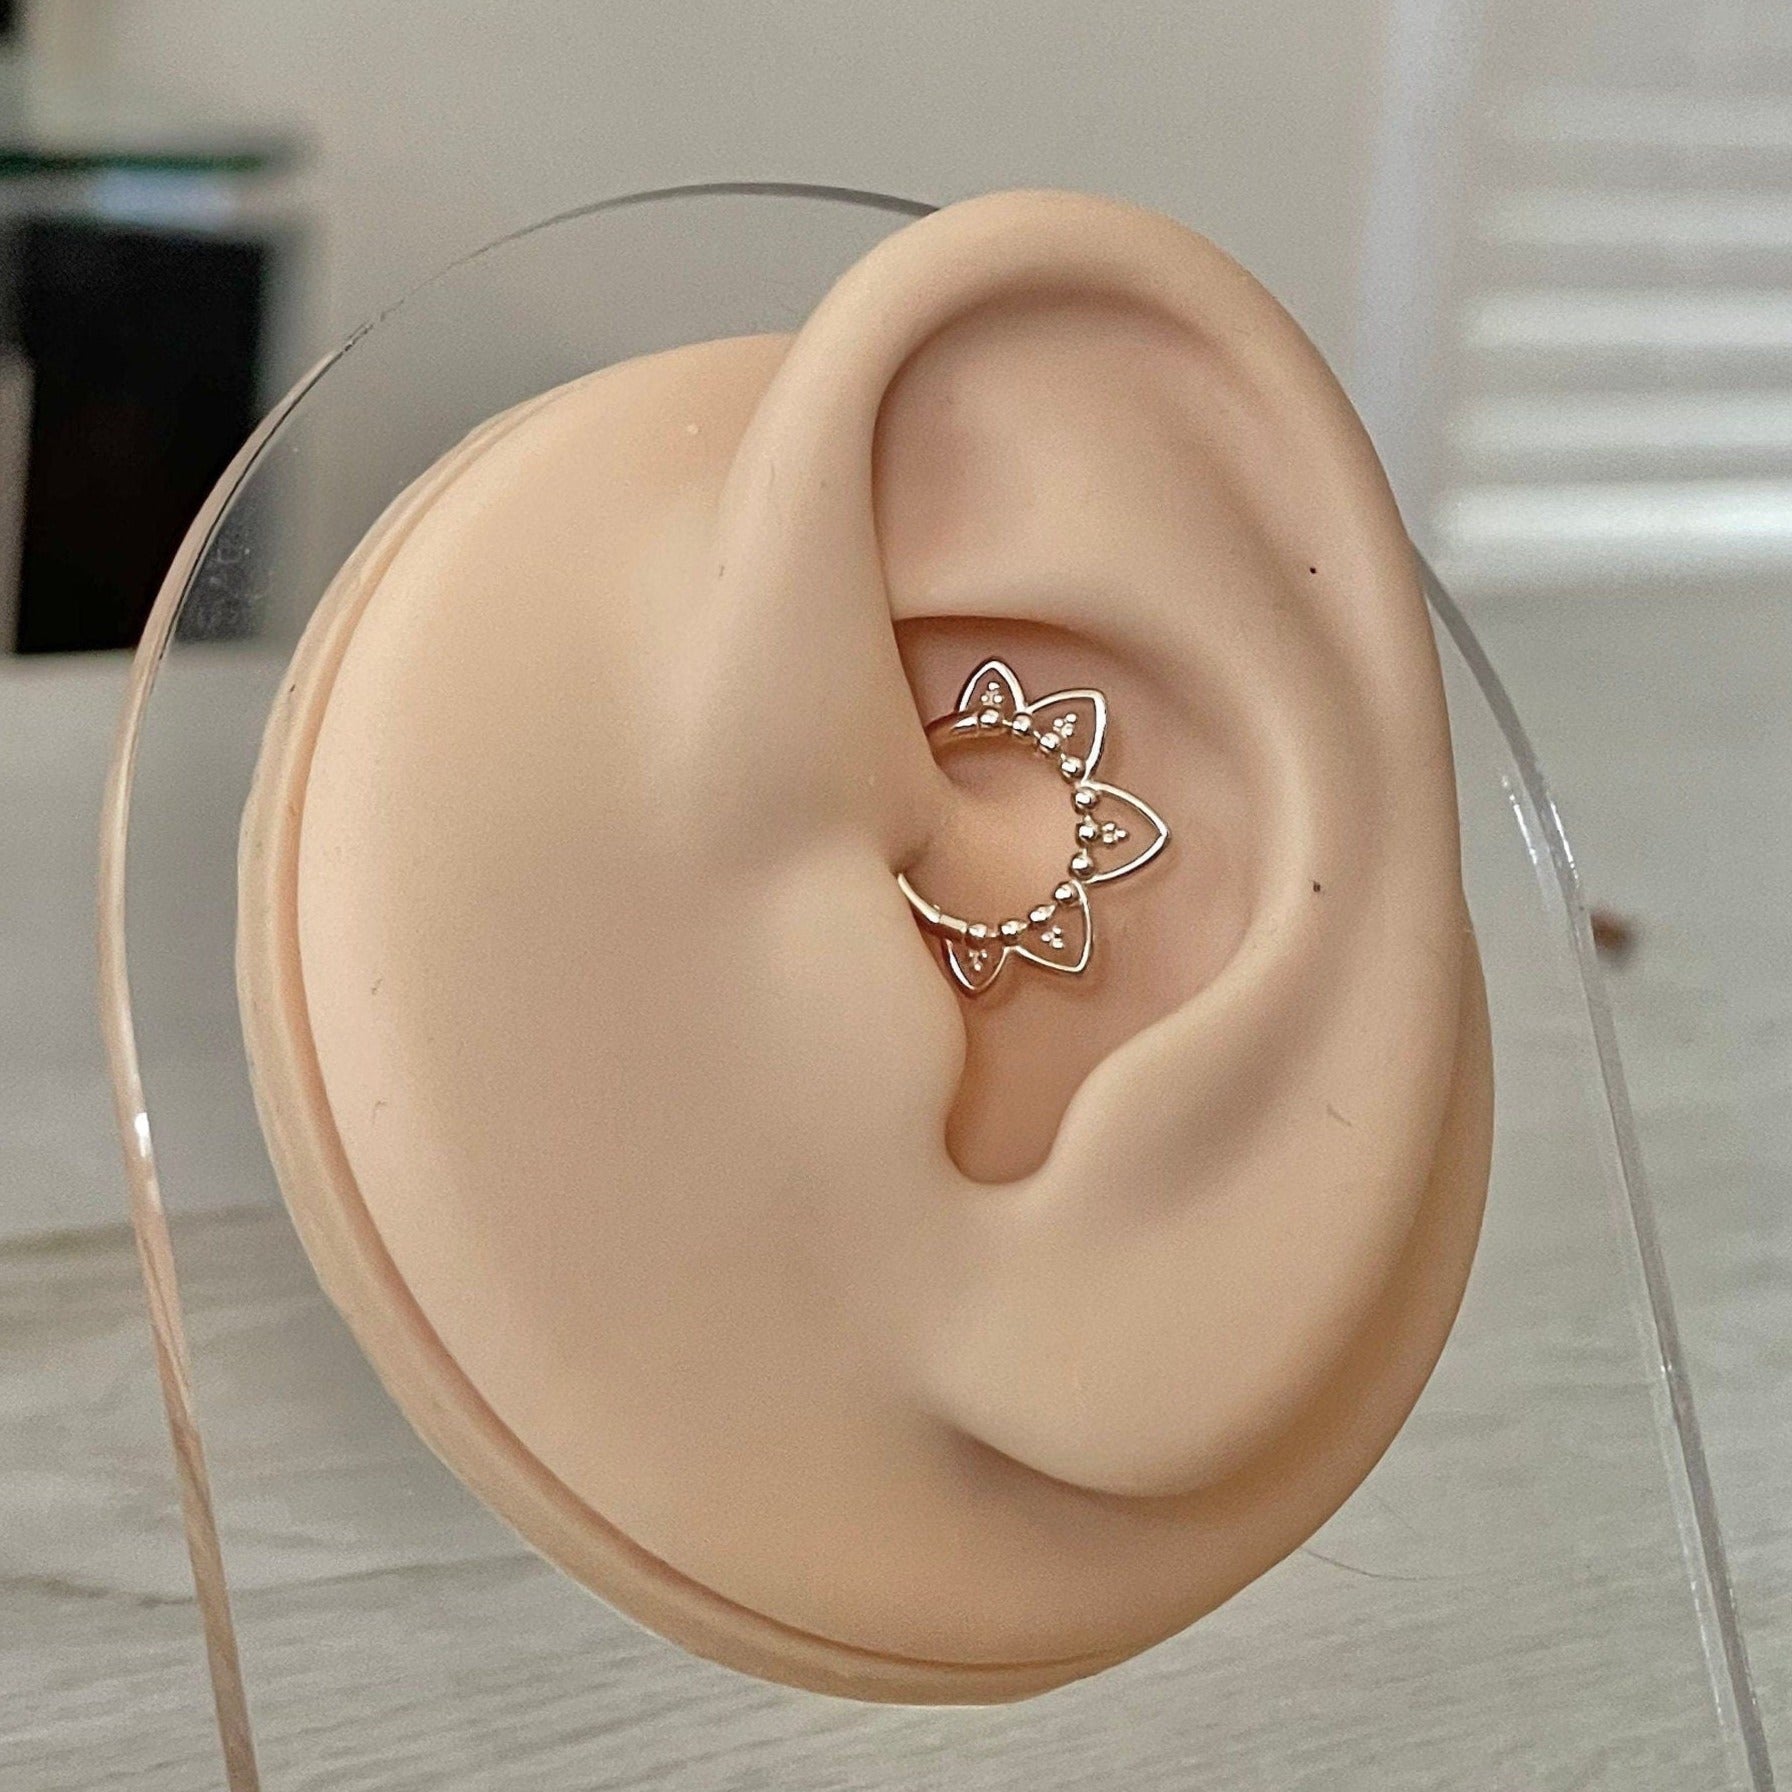 Solid Gold Daith Earring Jewelry (16G, 8mm, 14k Solid White or Yellow Gold)